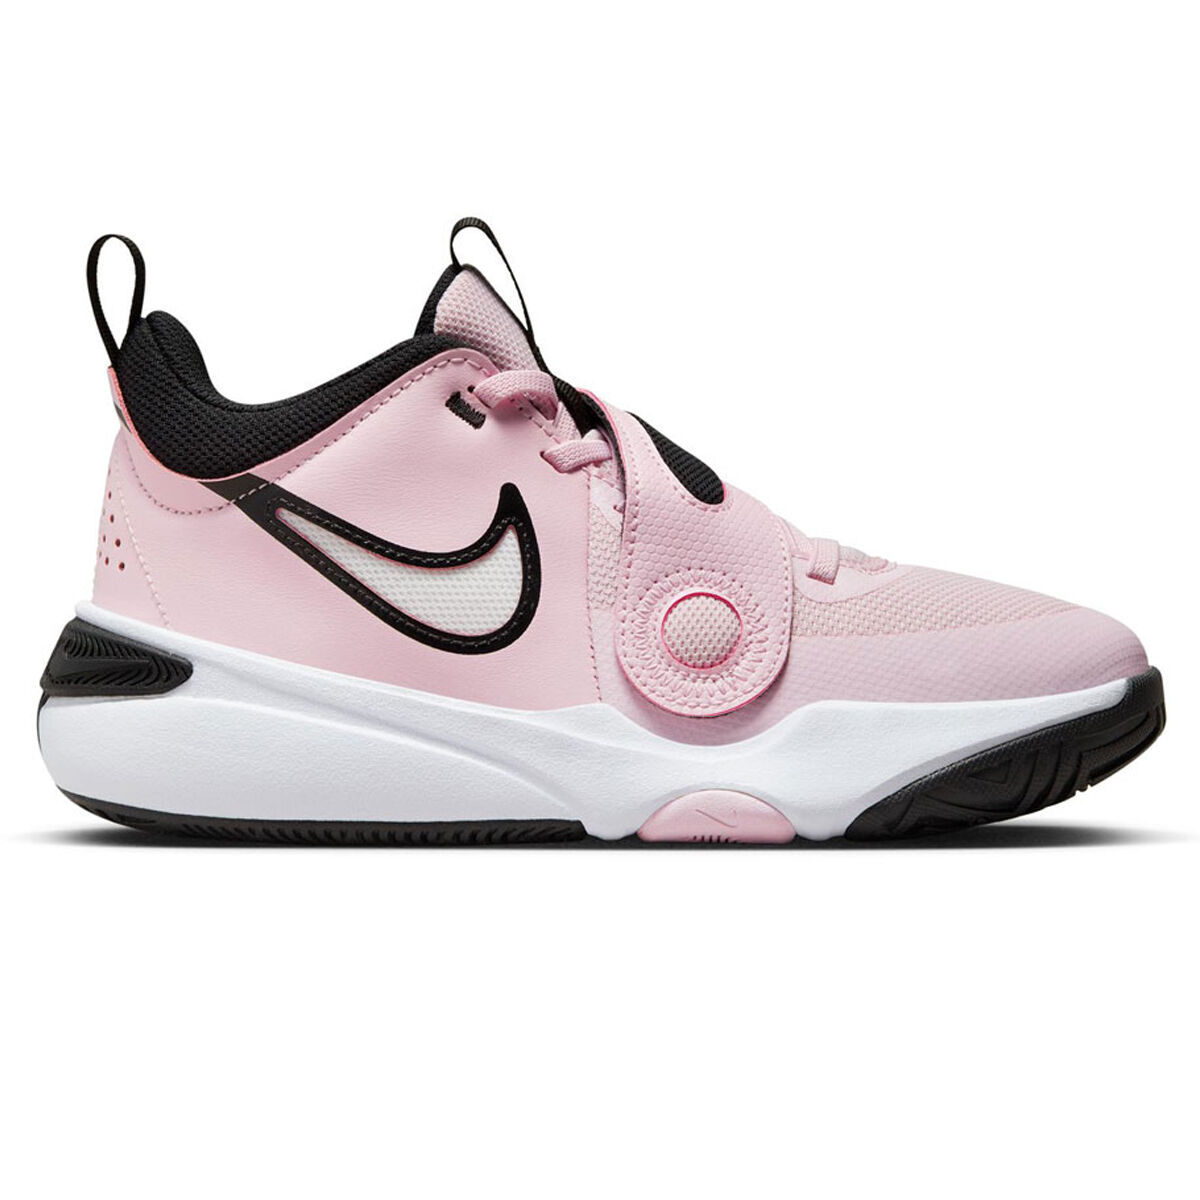 NIKE Precision 6 Basketball Shoes For Women - Buy NIKE Precision 6 Basketball  Shoes For Women Online at Best Price - Shop Online for Footwears in India |  Flipkart.com